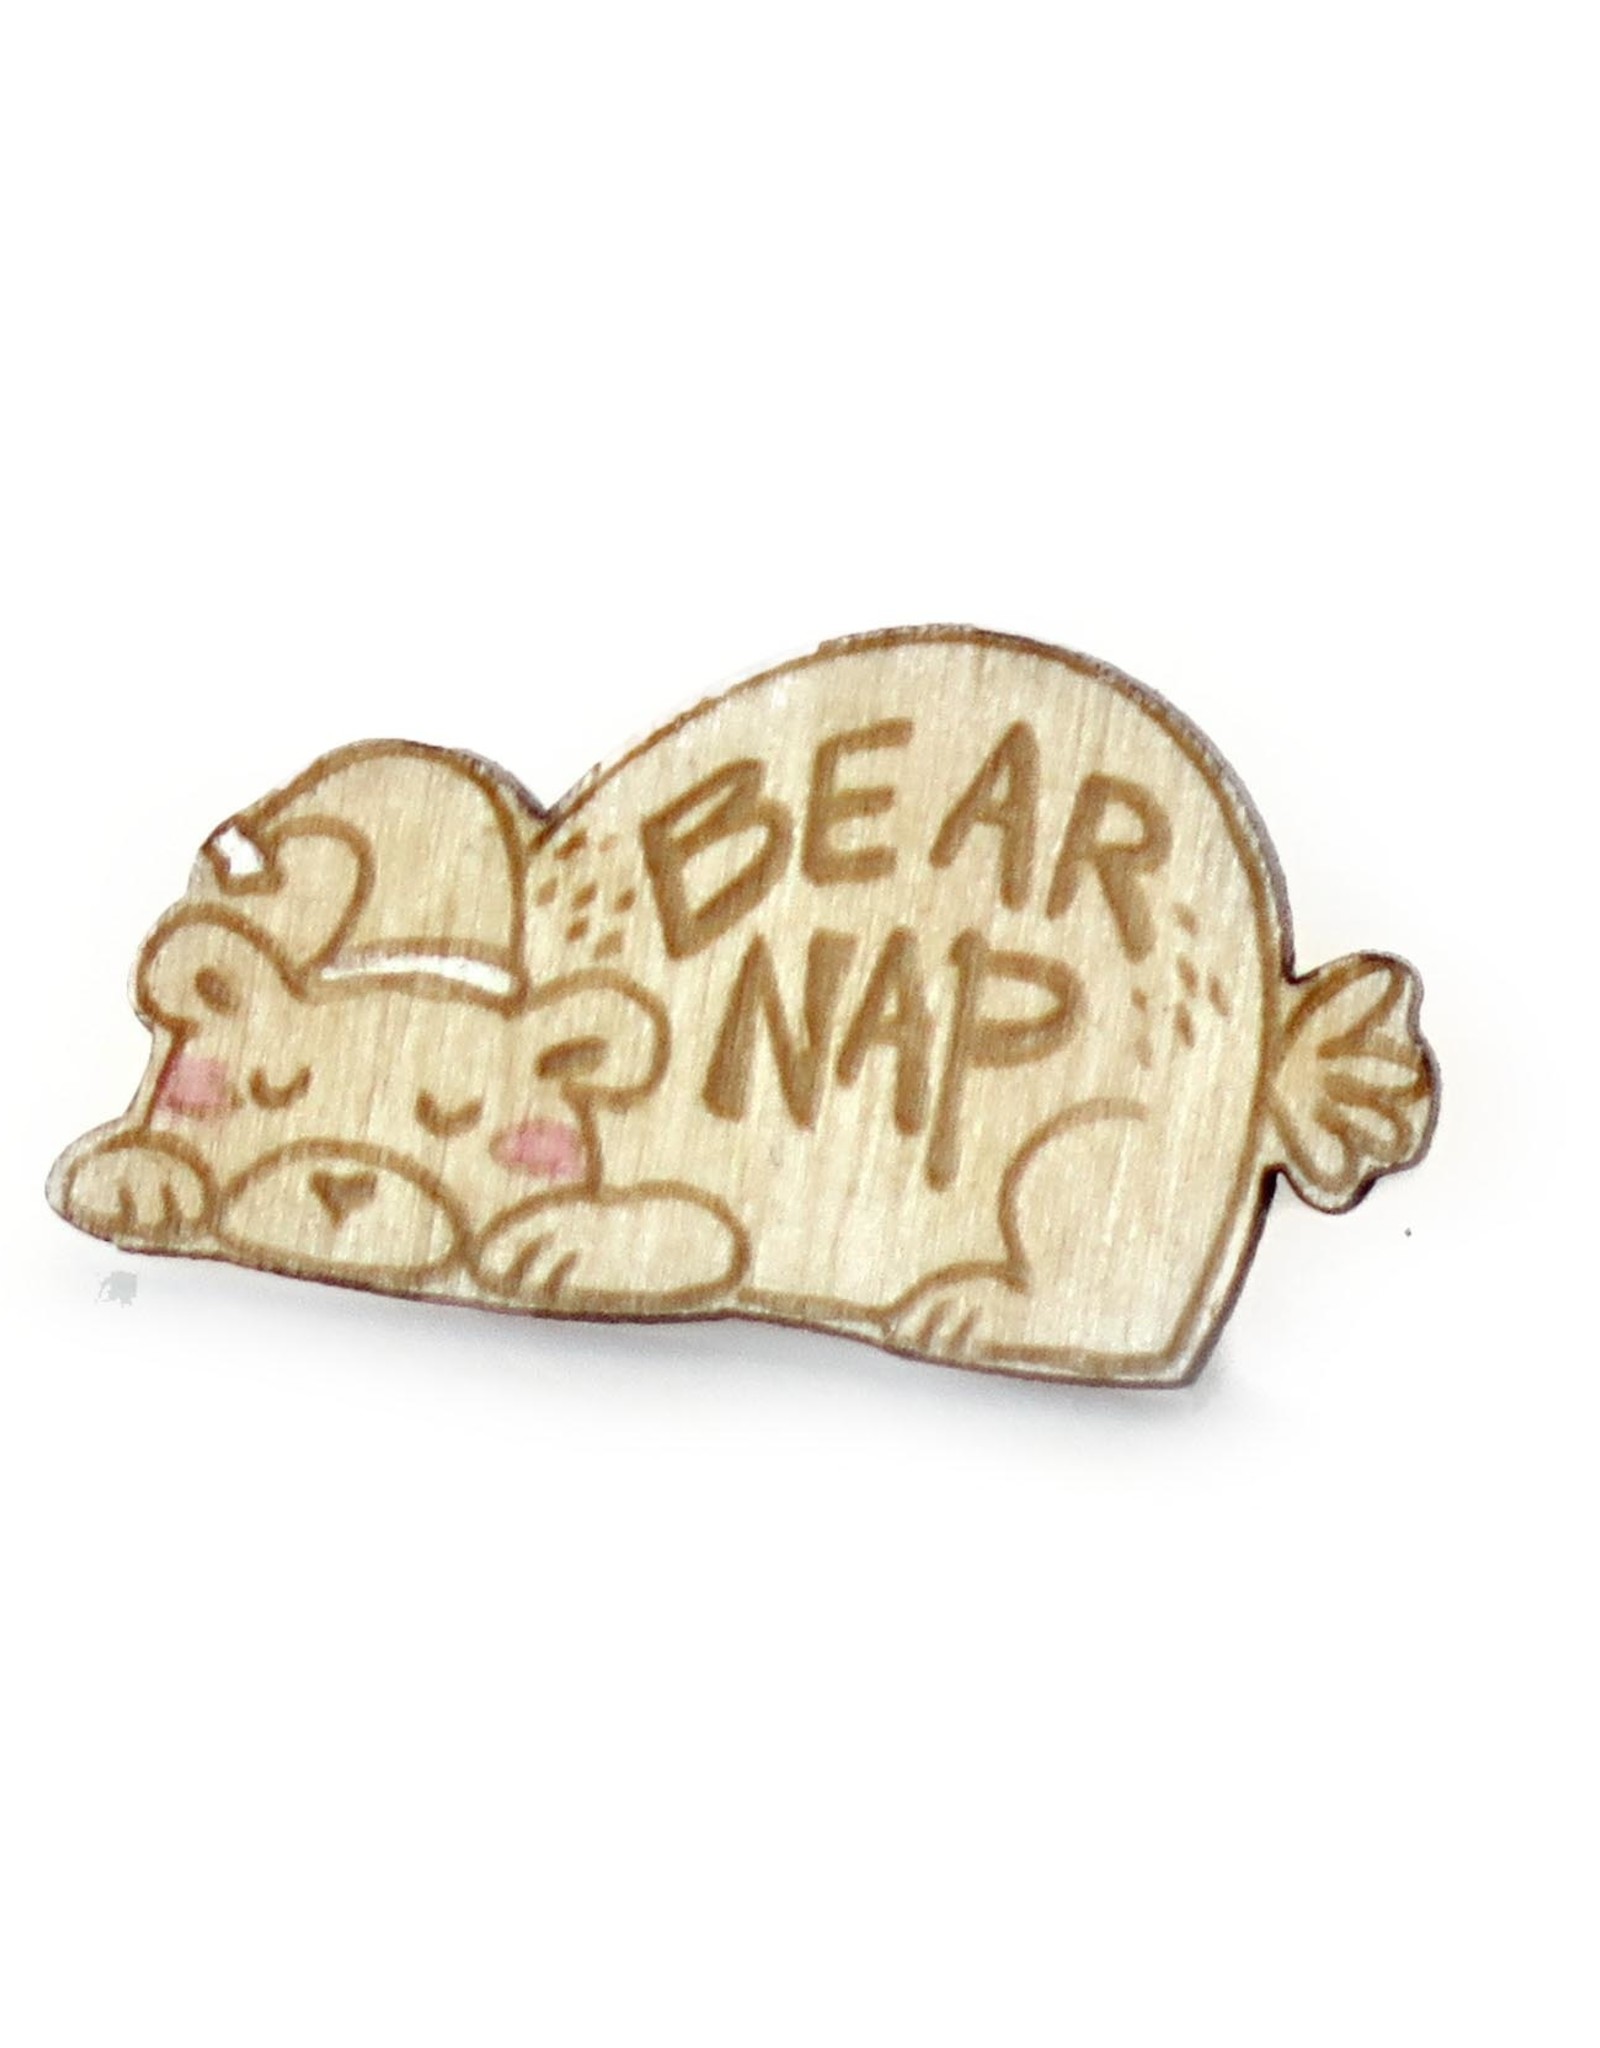 Sophie Quillec "Bear Nap" pin by Sophie Quillec